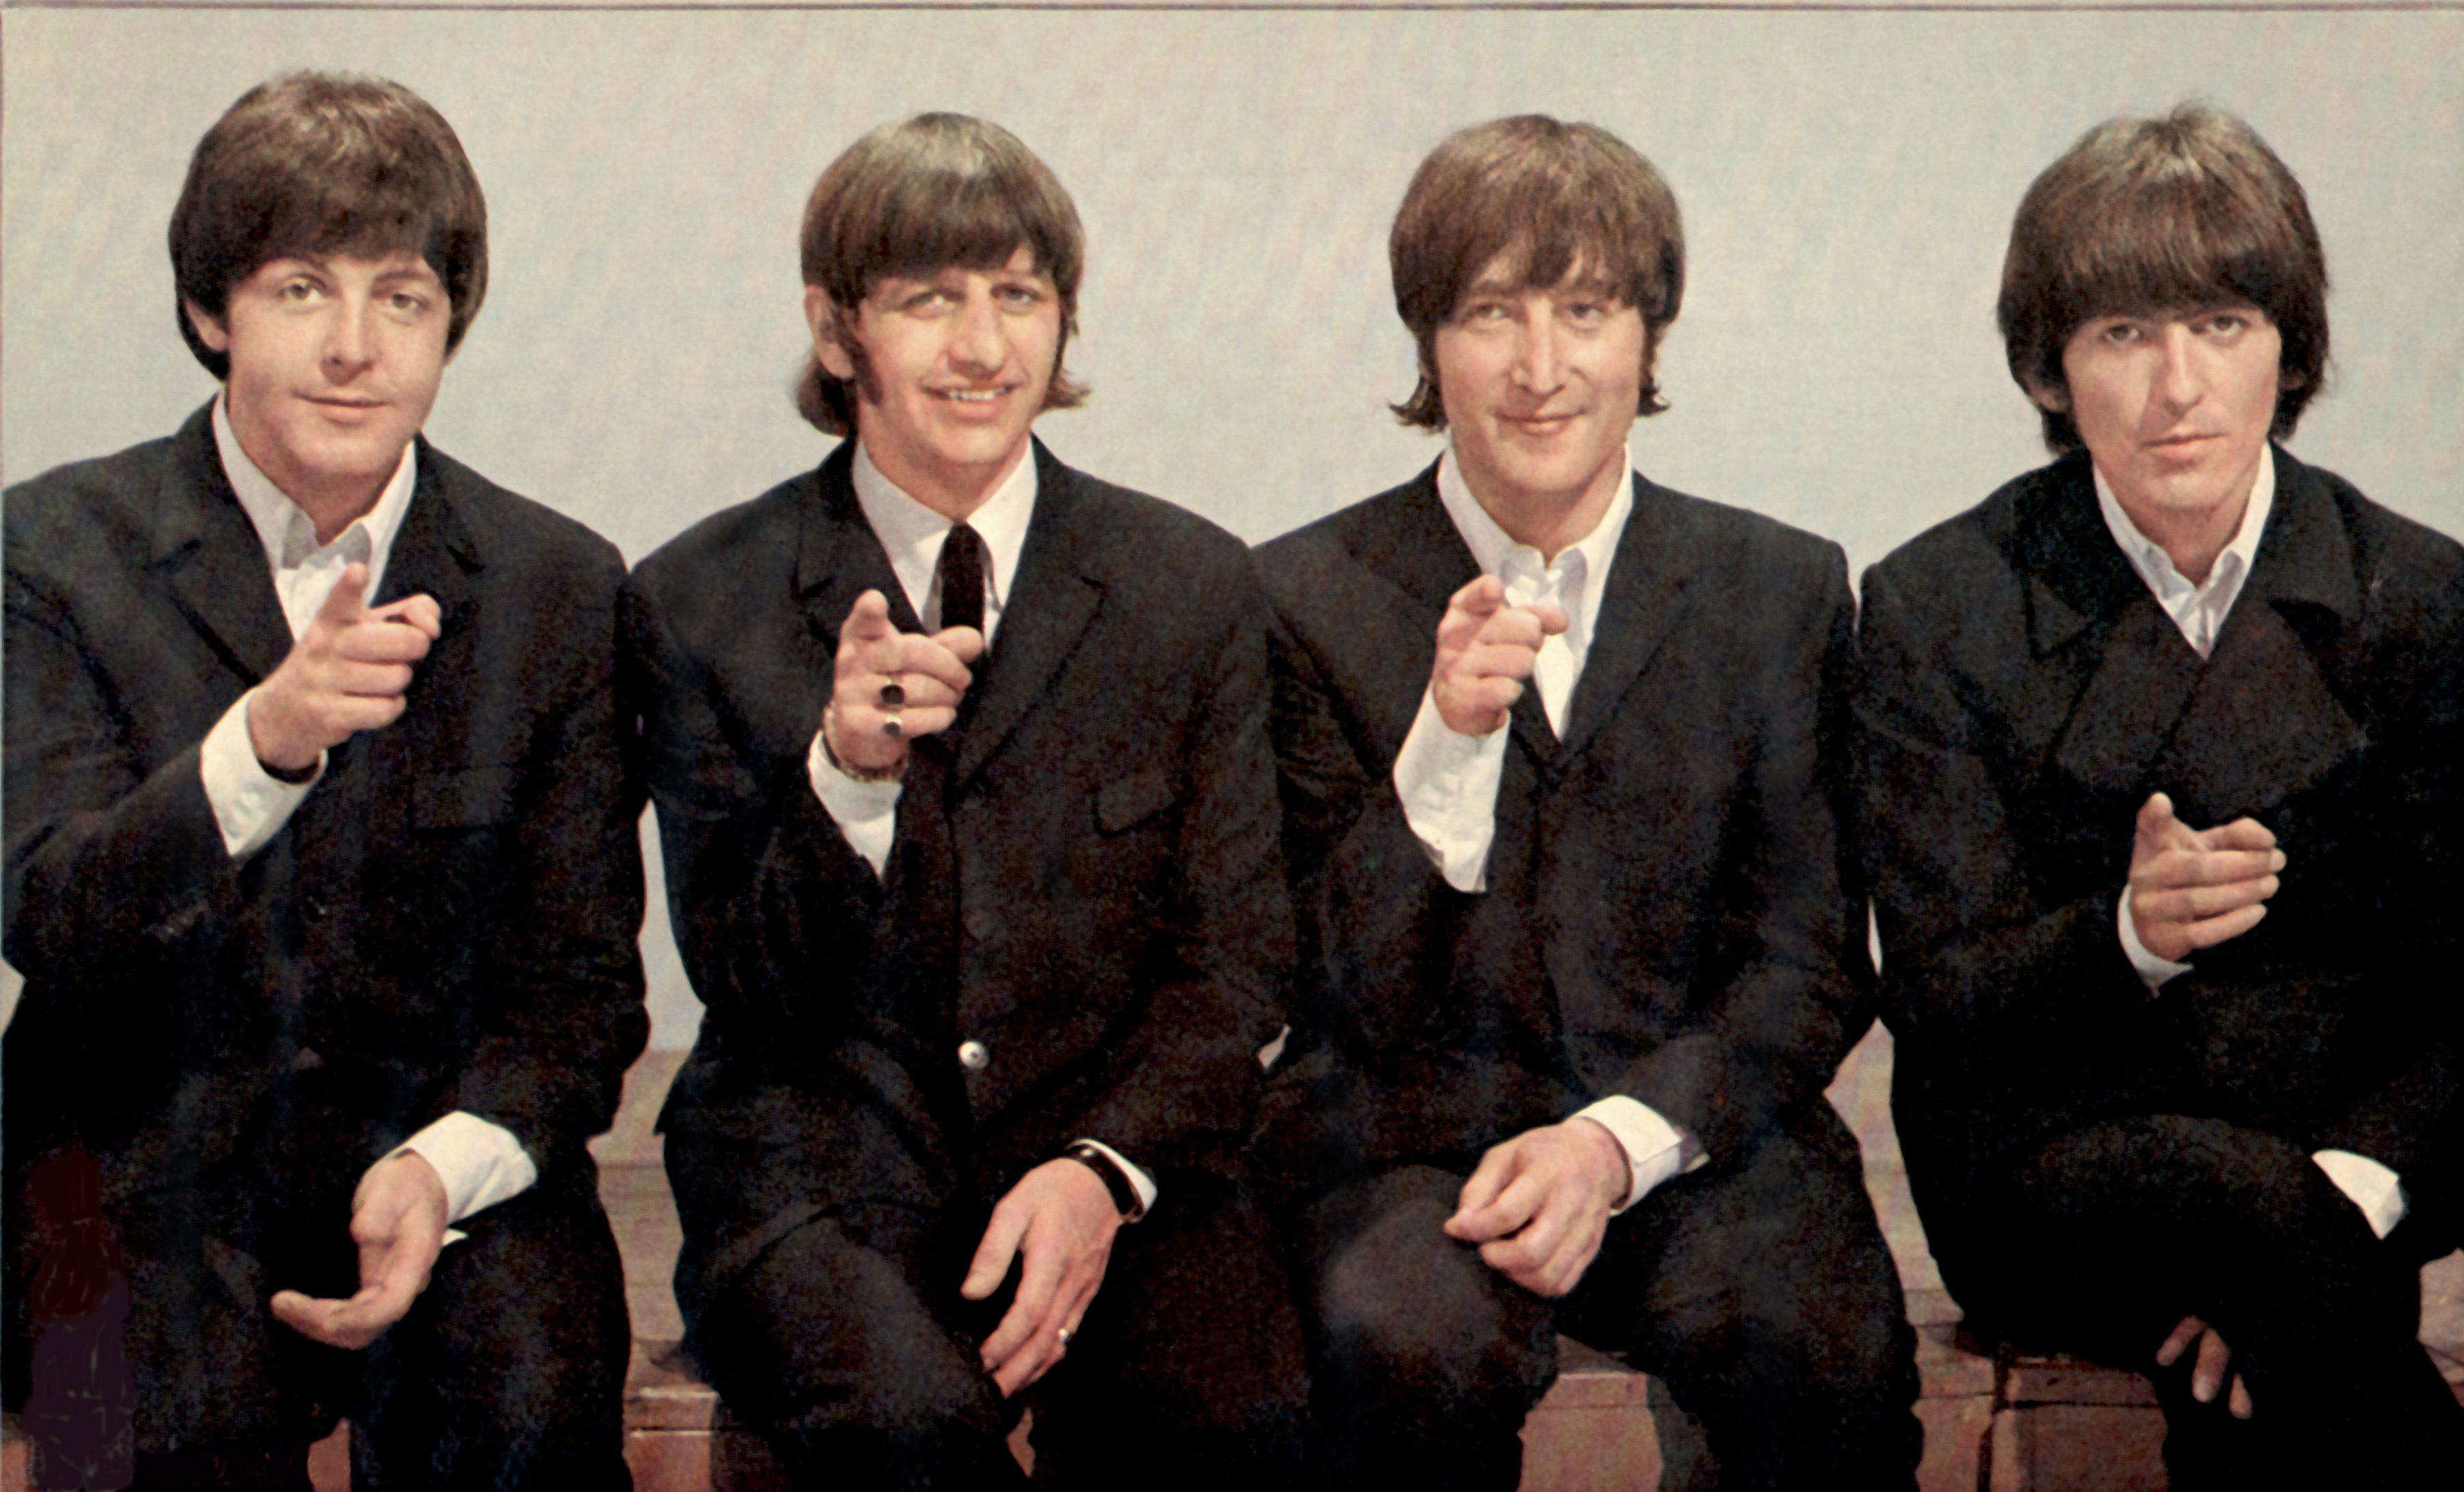 The Beatles Wallpapers Hd